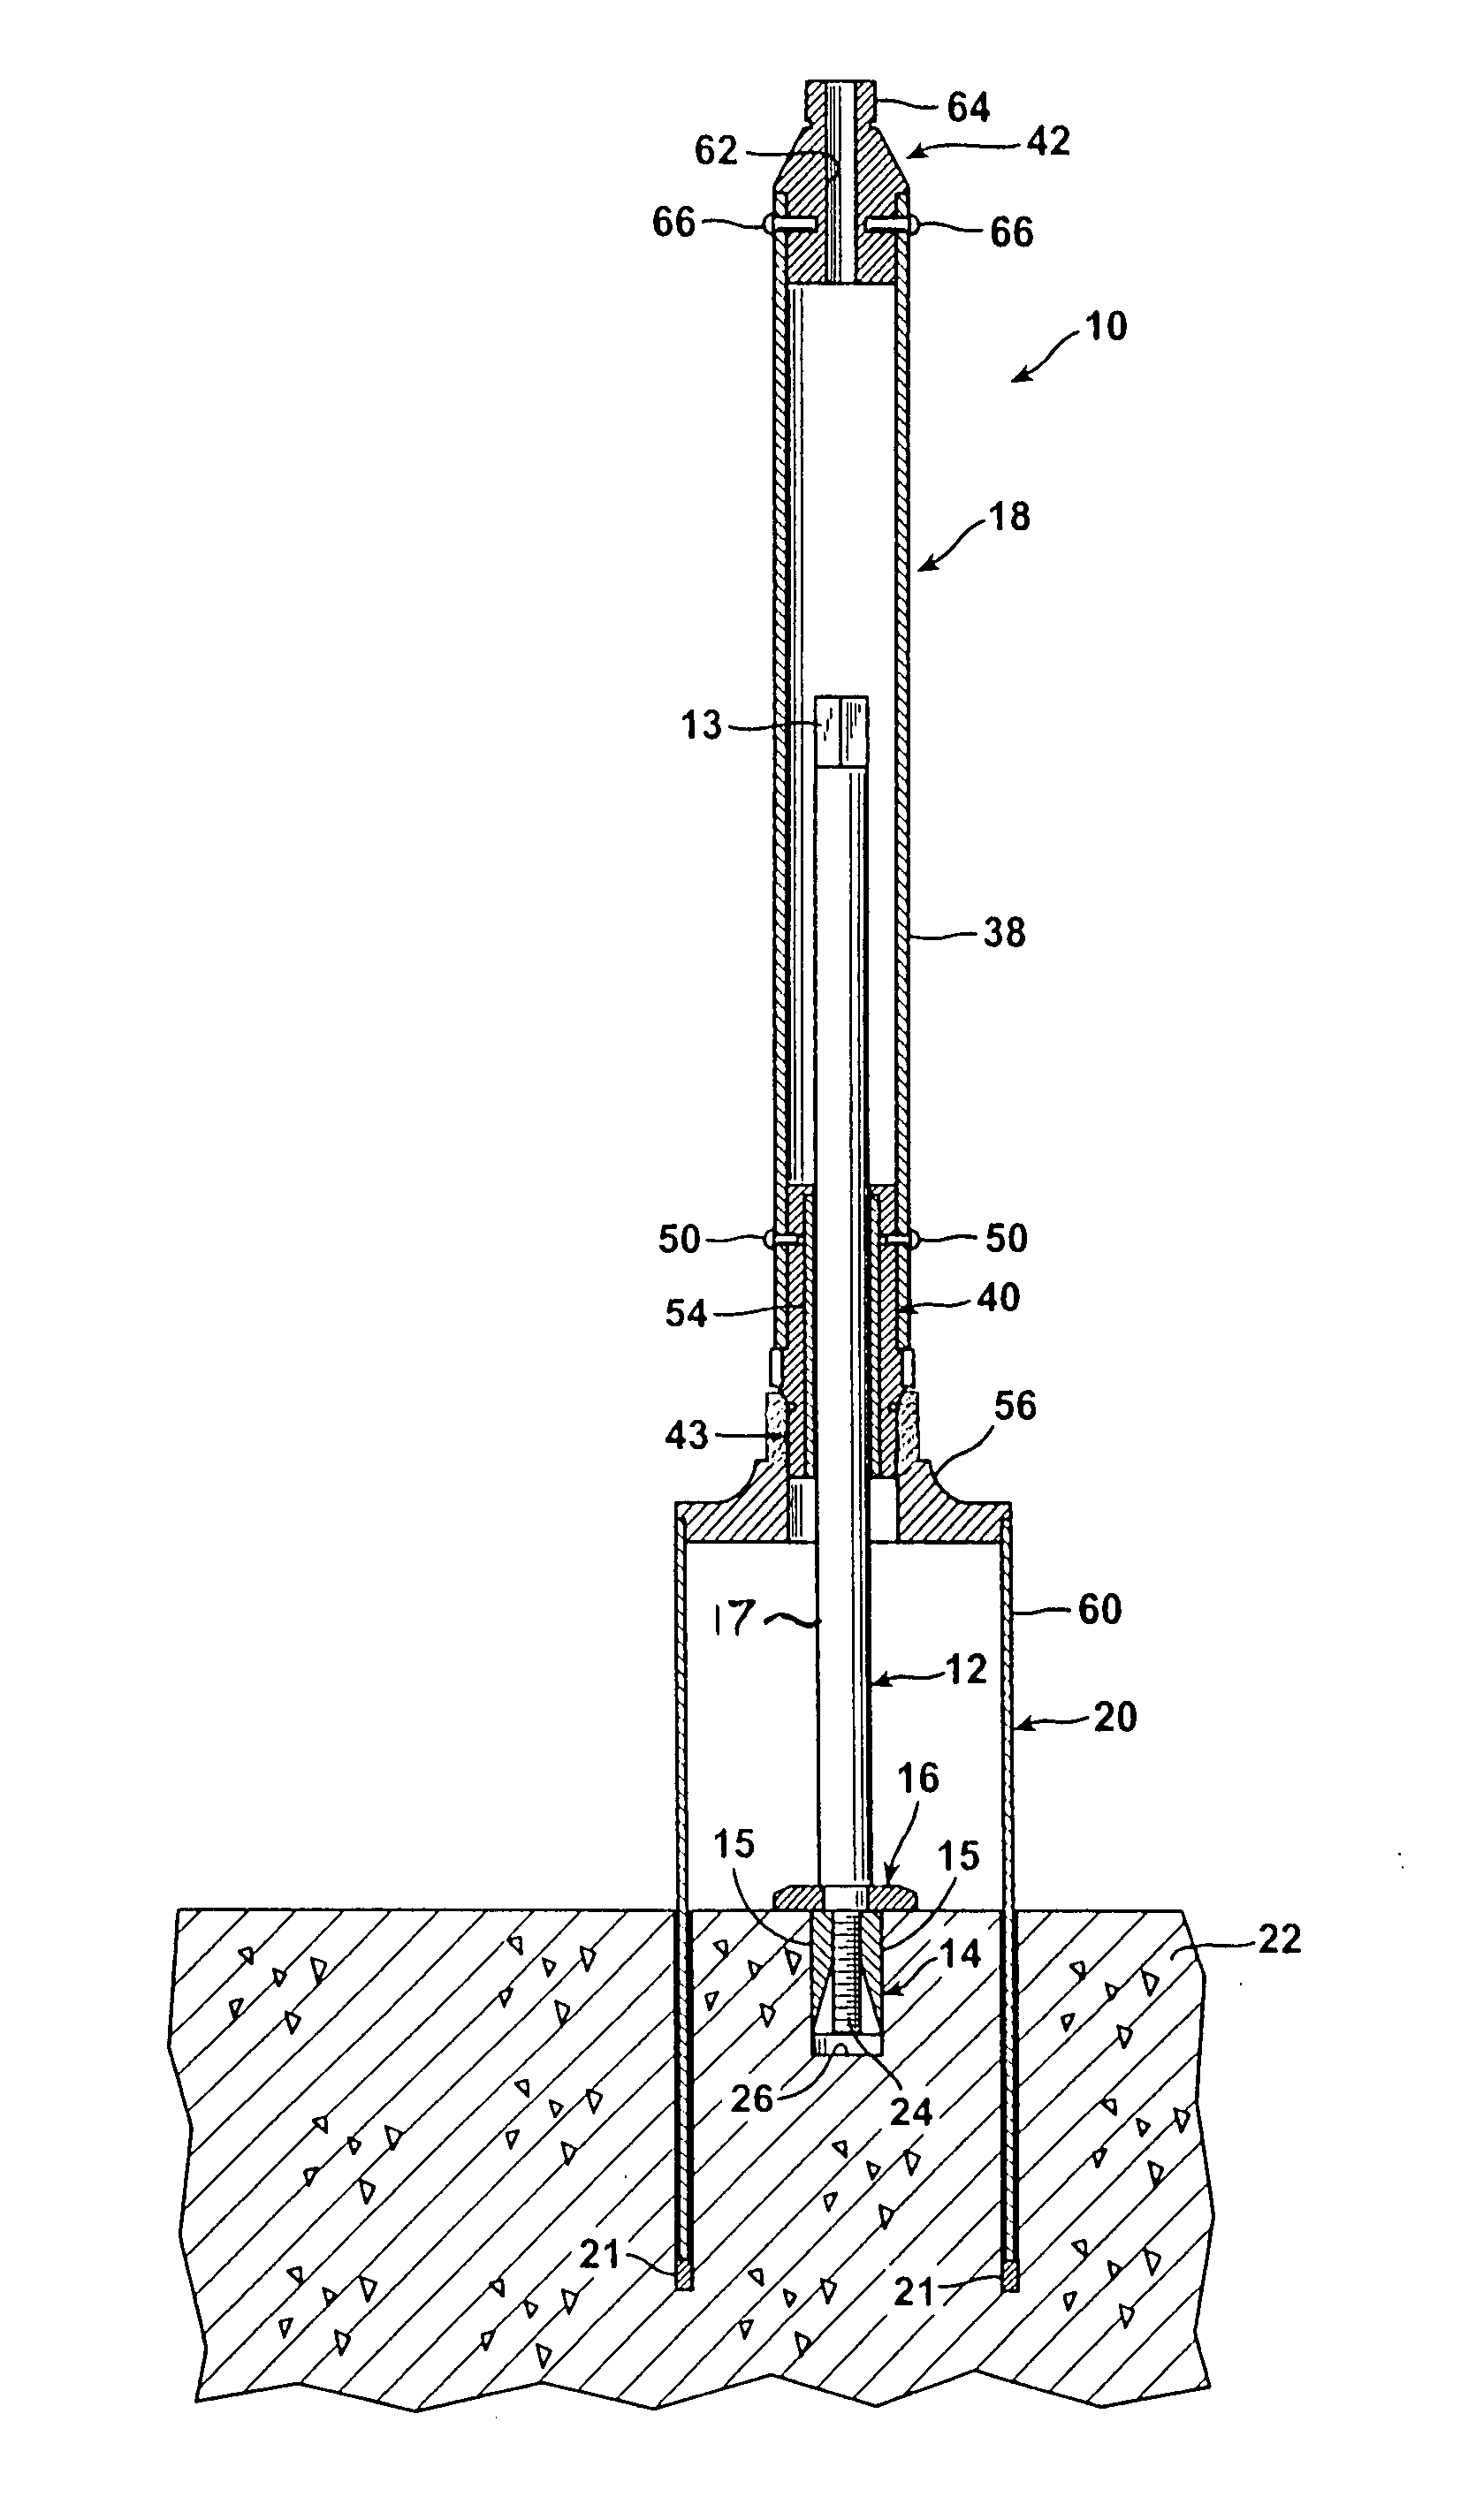 Hole coring system